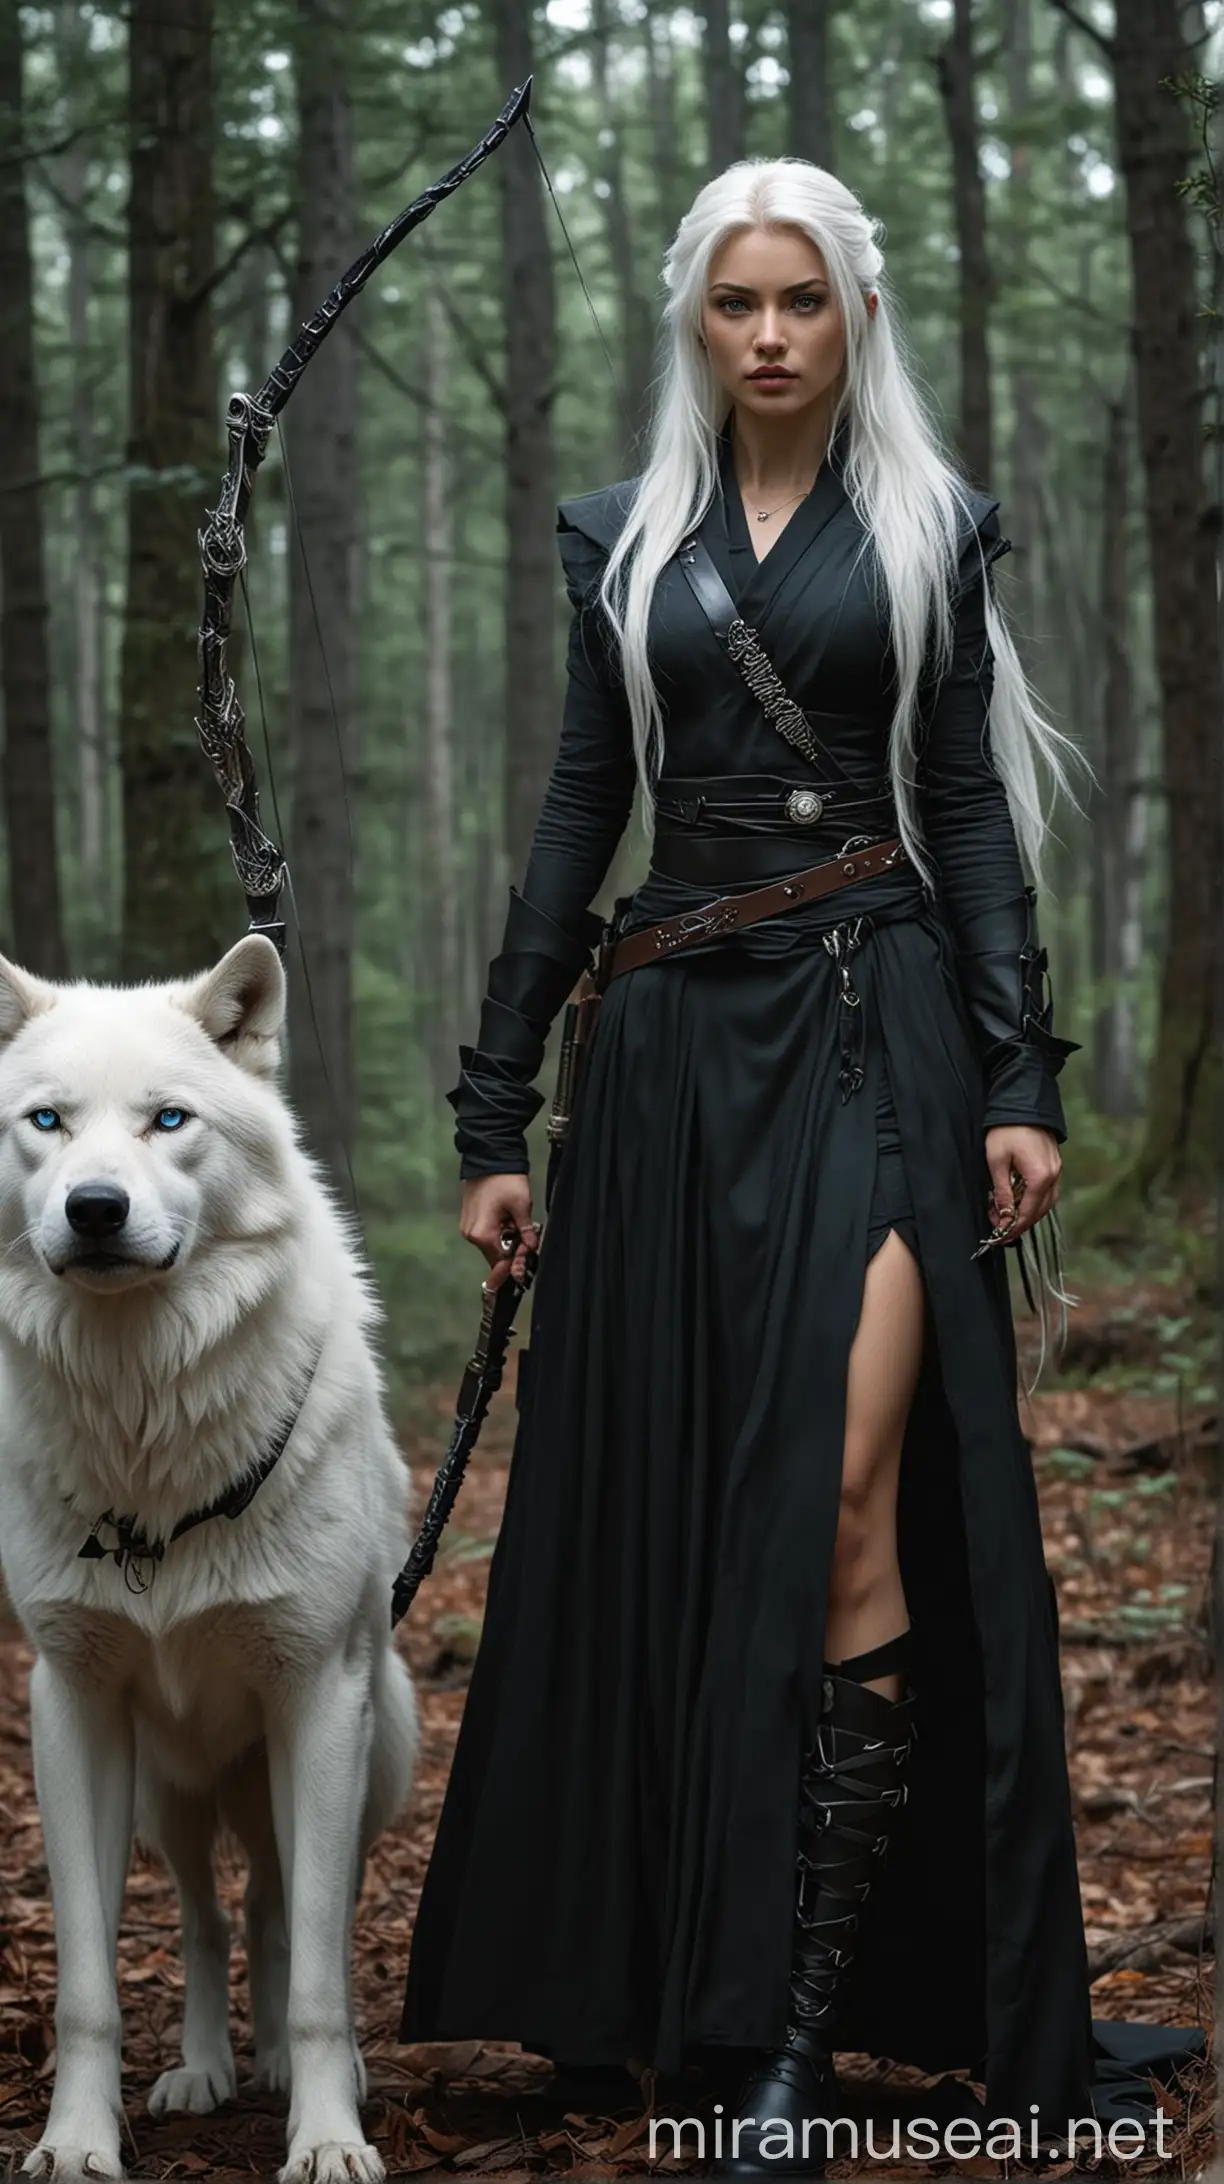 A regal and beautiful woman with tan skin, who has non pointy ears, blue eyes and long white hair who wears a sleek black clothes that allow for maximum mobility. Have her traveling in the forest with her large white pet wolf.  She’s extremely badass. She wears moon shaped jewelry for her heritage, and her weapons are a long bow and arrow, as well as a katana. She is a very famous and feared assassin. 